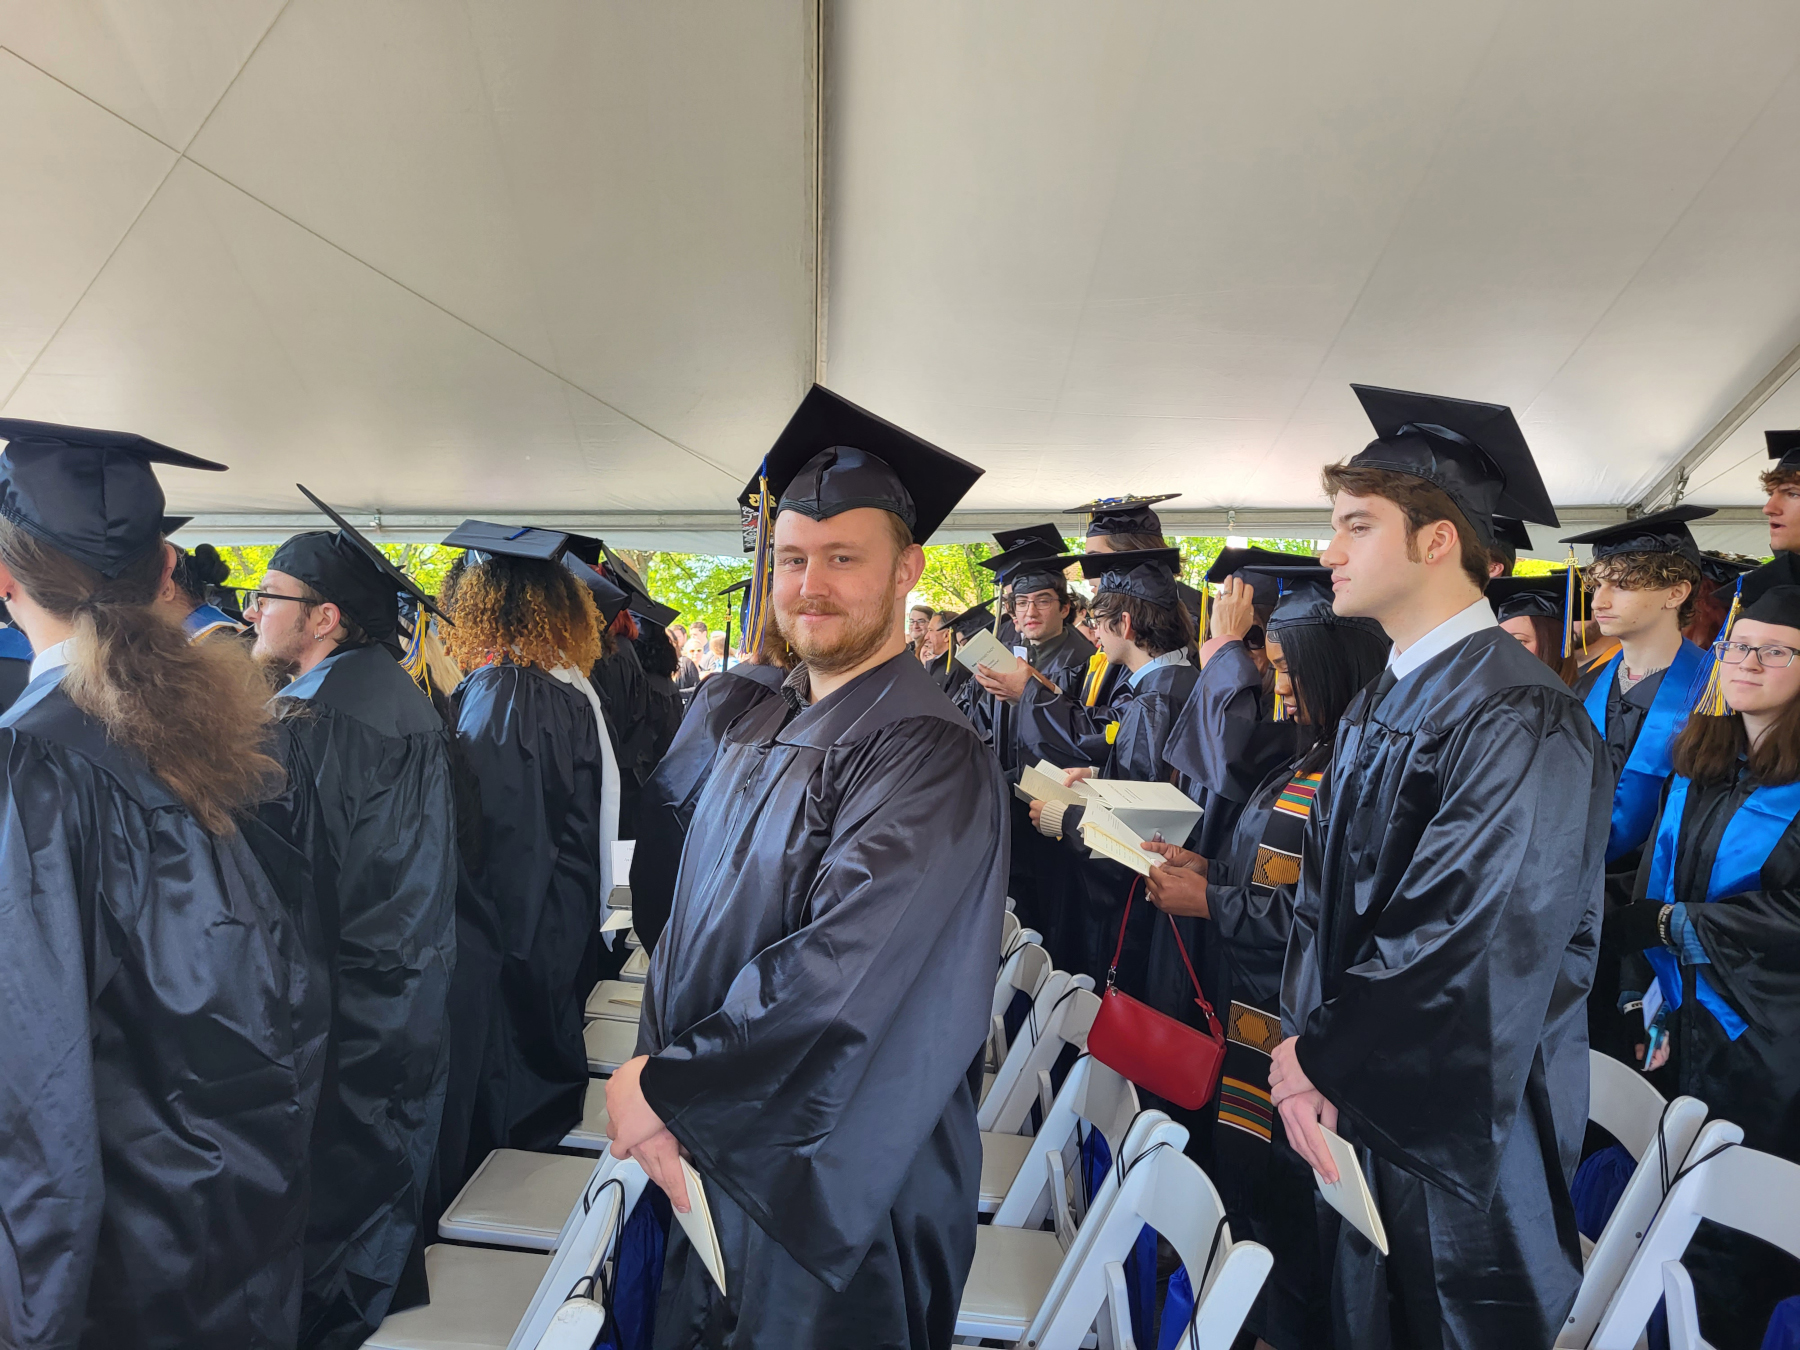 Graduate sitting in row under tent with other grads, smiling